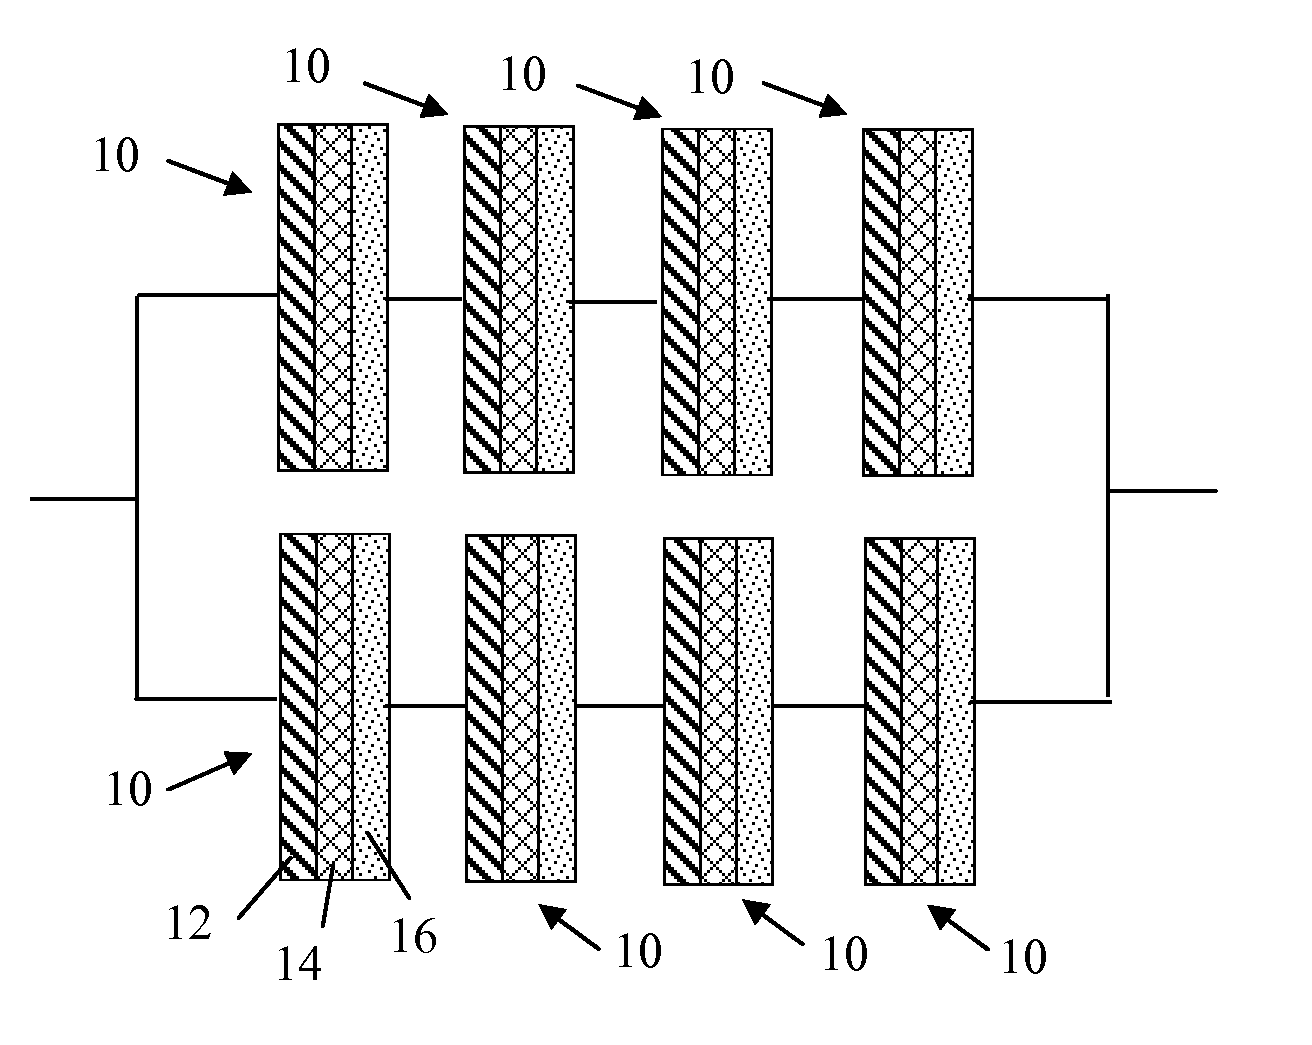 Lithium-oxygen electrochemical cells and batteries